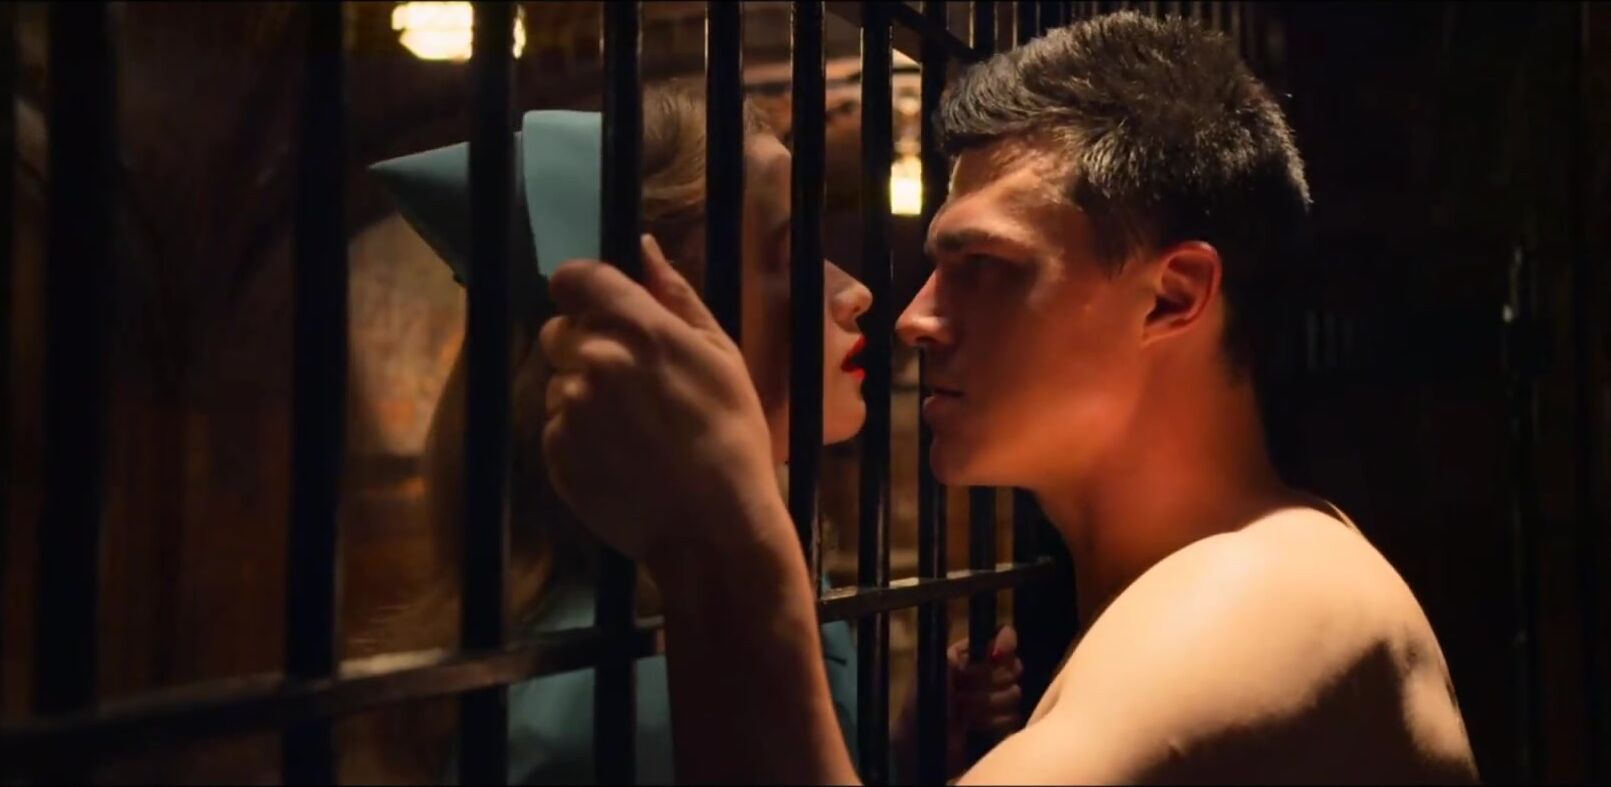 RulerTube Alice Englert can't resist caged boy and goes jerking him off in TV series Ratched Cute